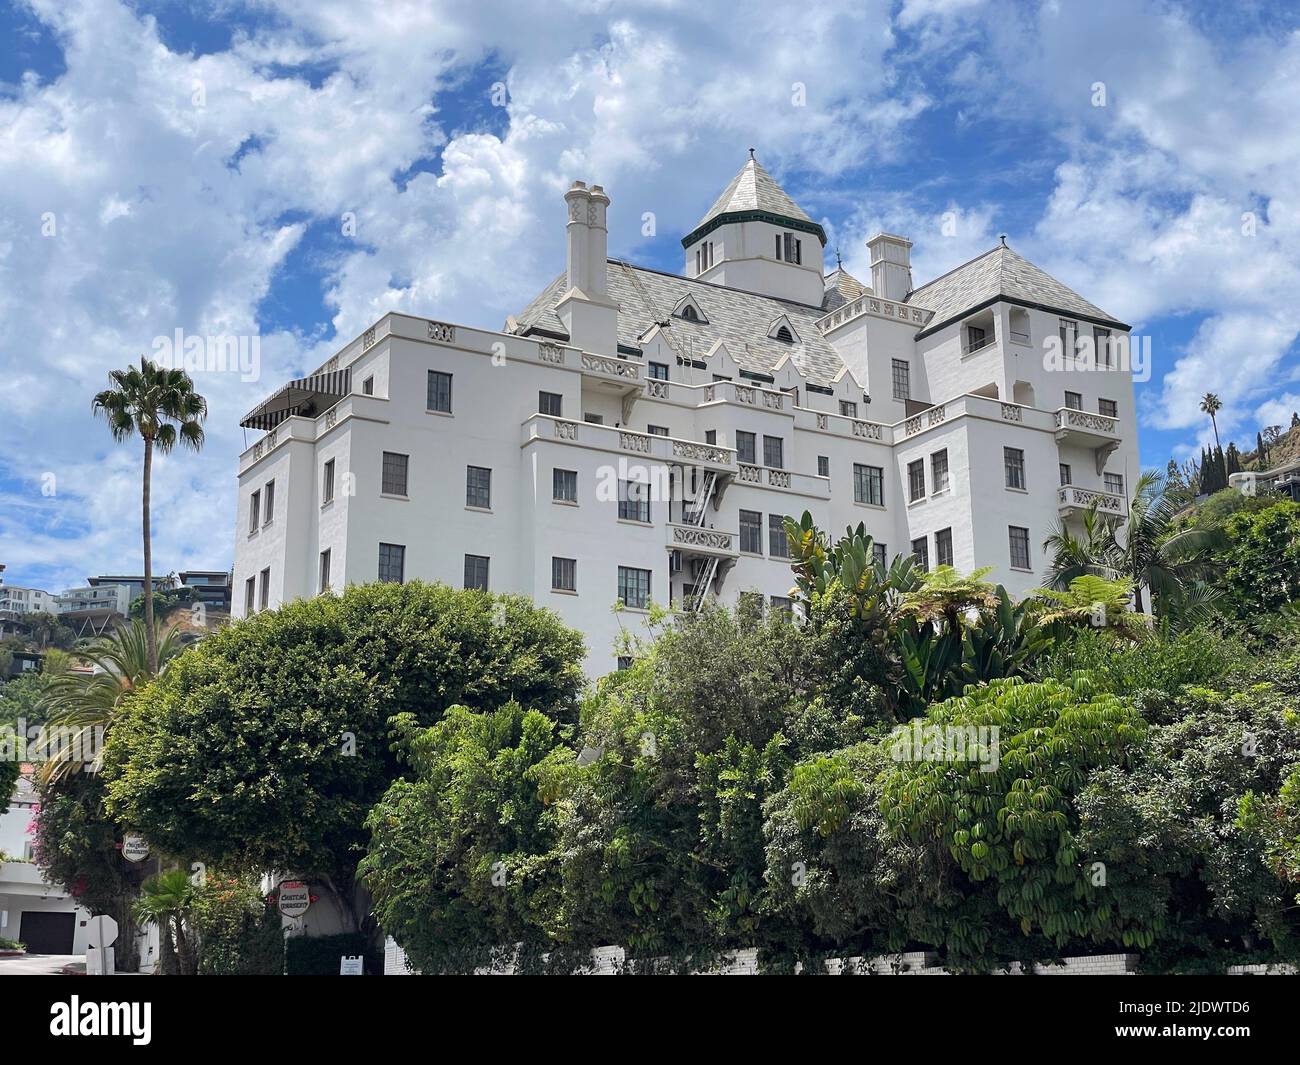 Chateau Marmont, hotel, Sunset Strip, West Hollywood, Los Angeles Foto Stock